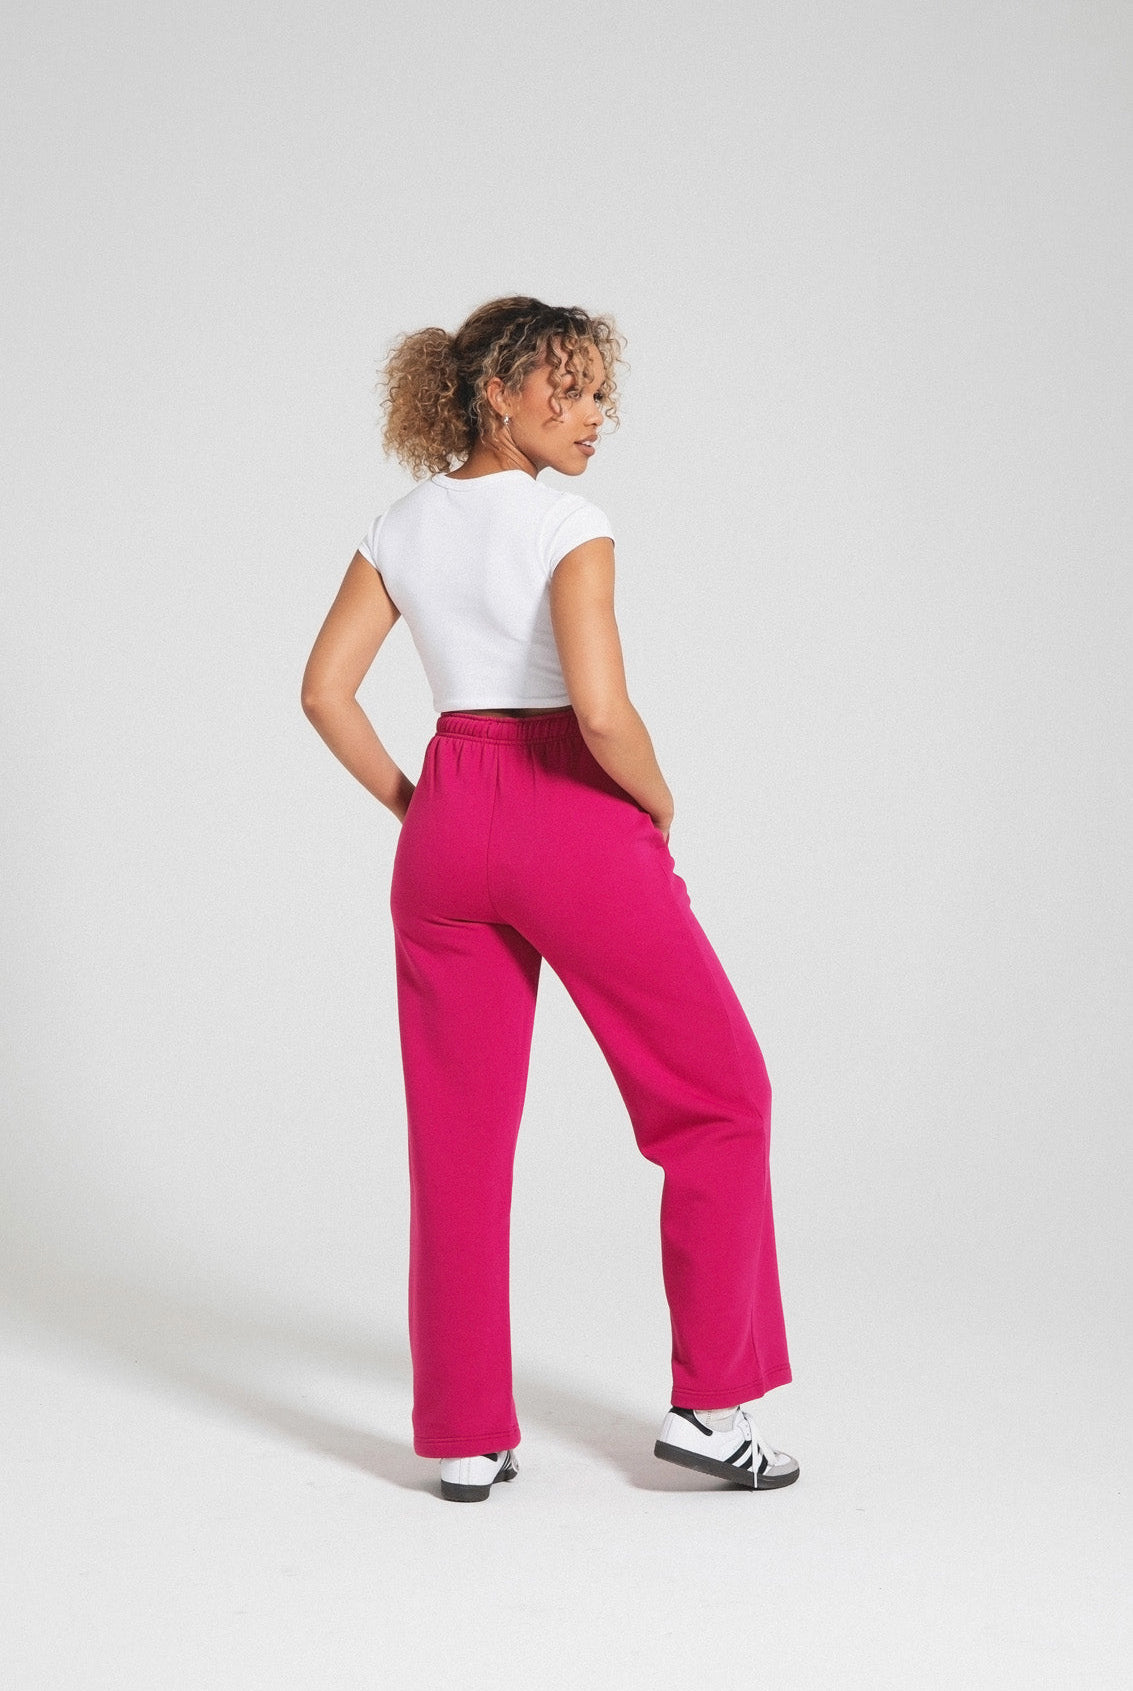 Womens 'MAYANNE' Joggers - PINK - Shop at www.Bench.co.uk #LoveMyHood